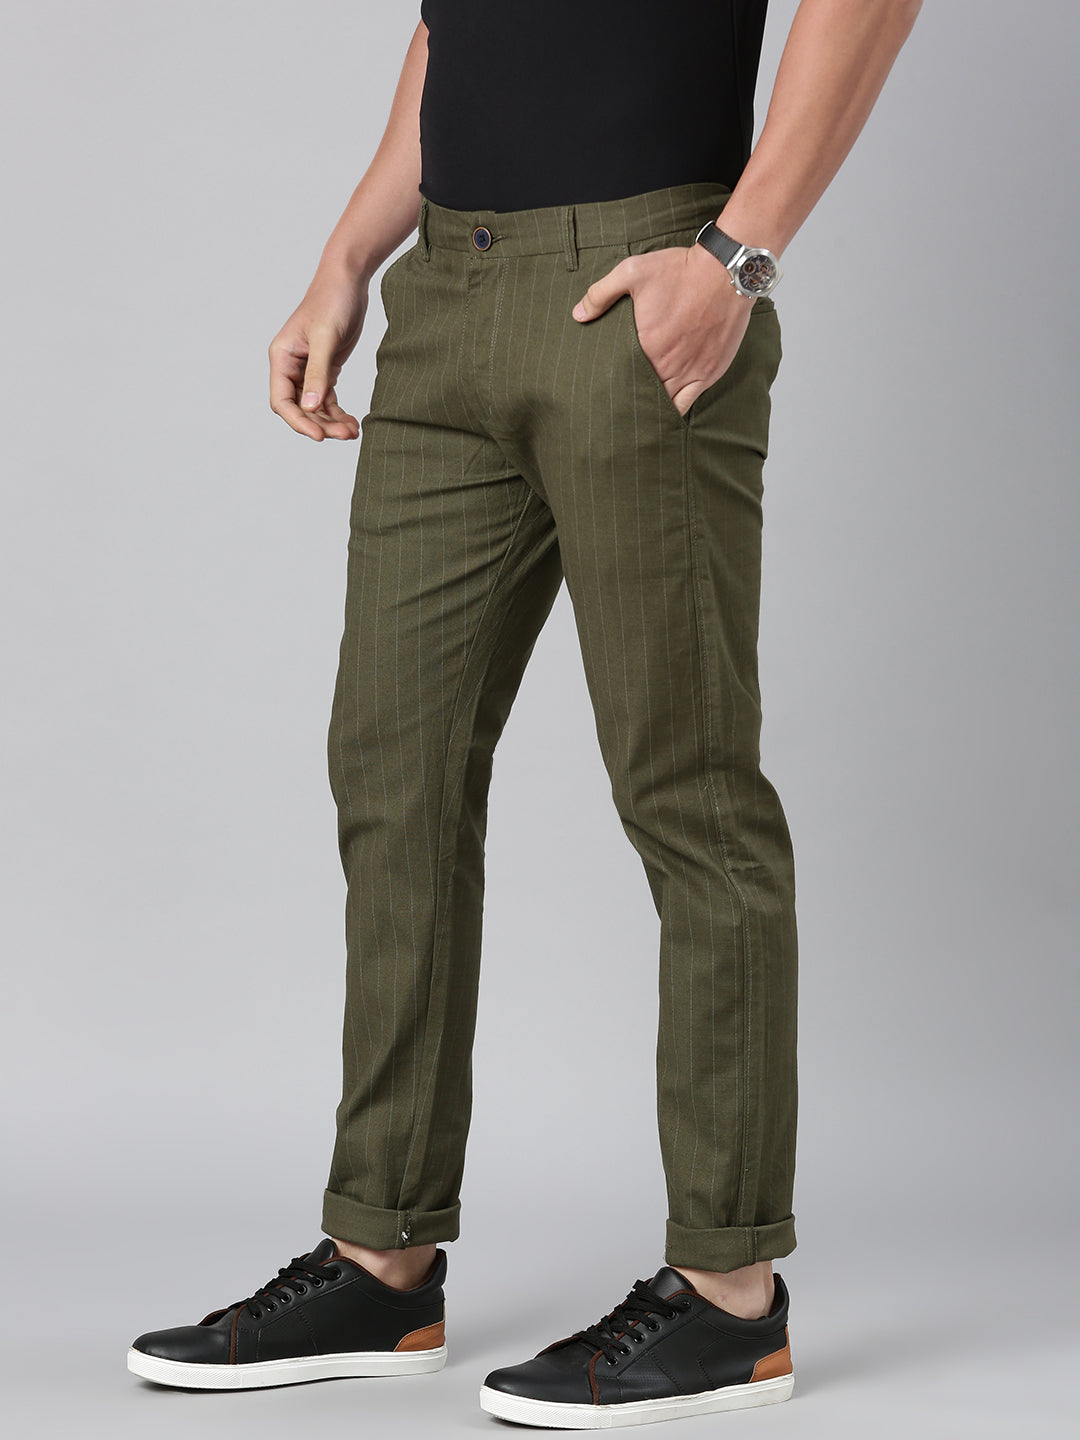 Majestic Man stripe Casual Solid Trouser - Olive